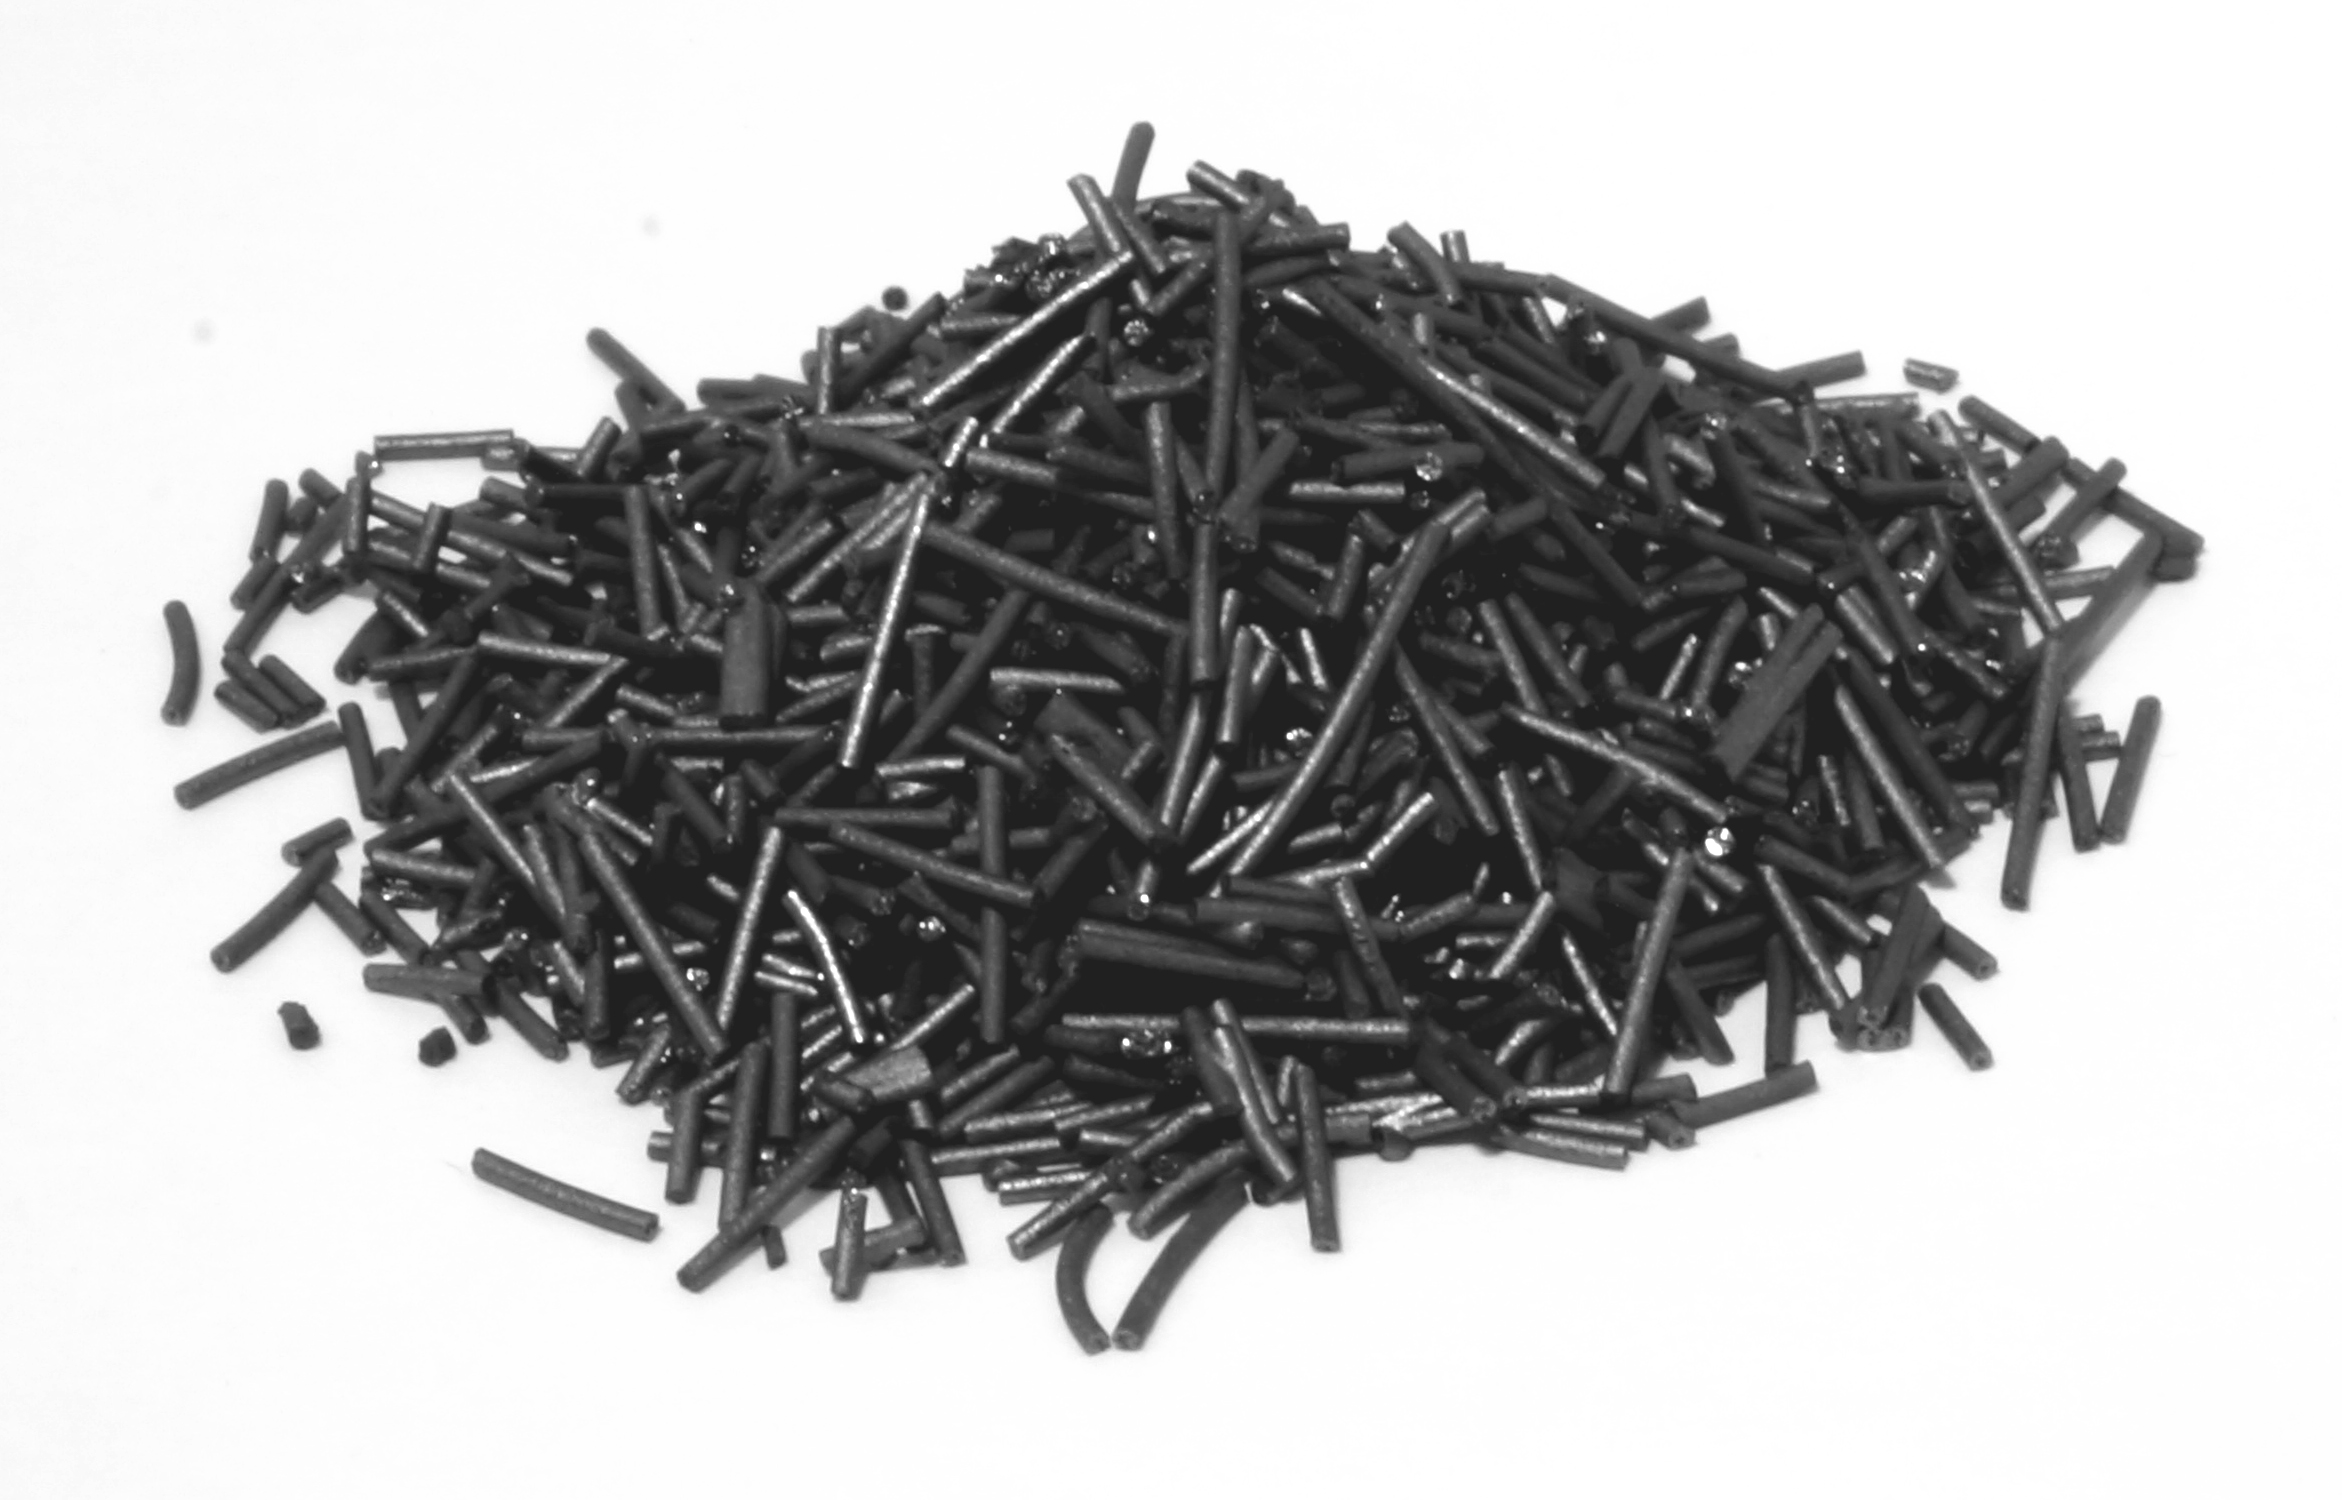 Copper-Oxide-Wires-Coarse-Coarse-wires-6-x-0.65mm-250gm

9-UN3077-NOT-RESTRICTED
Special-Provision-A197